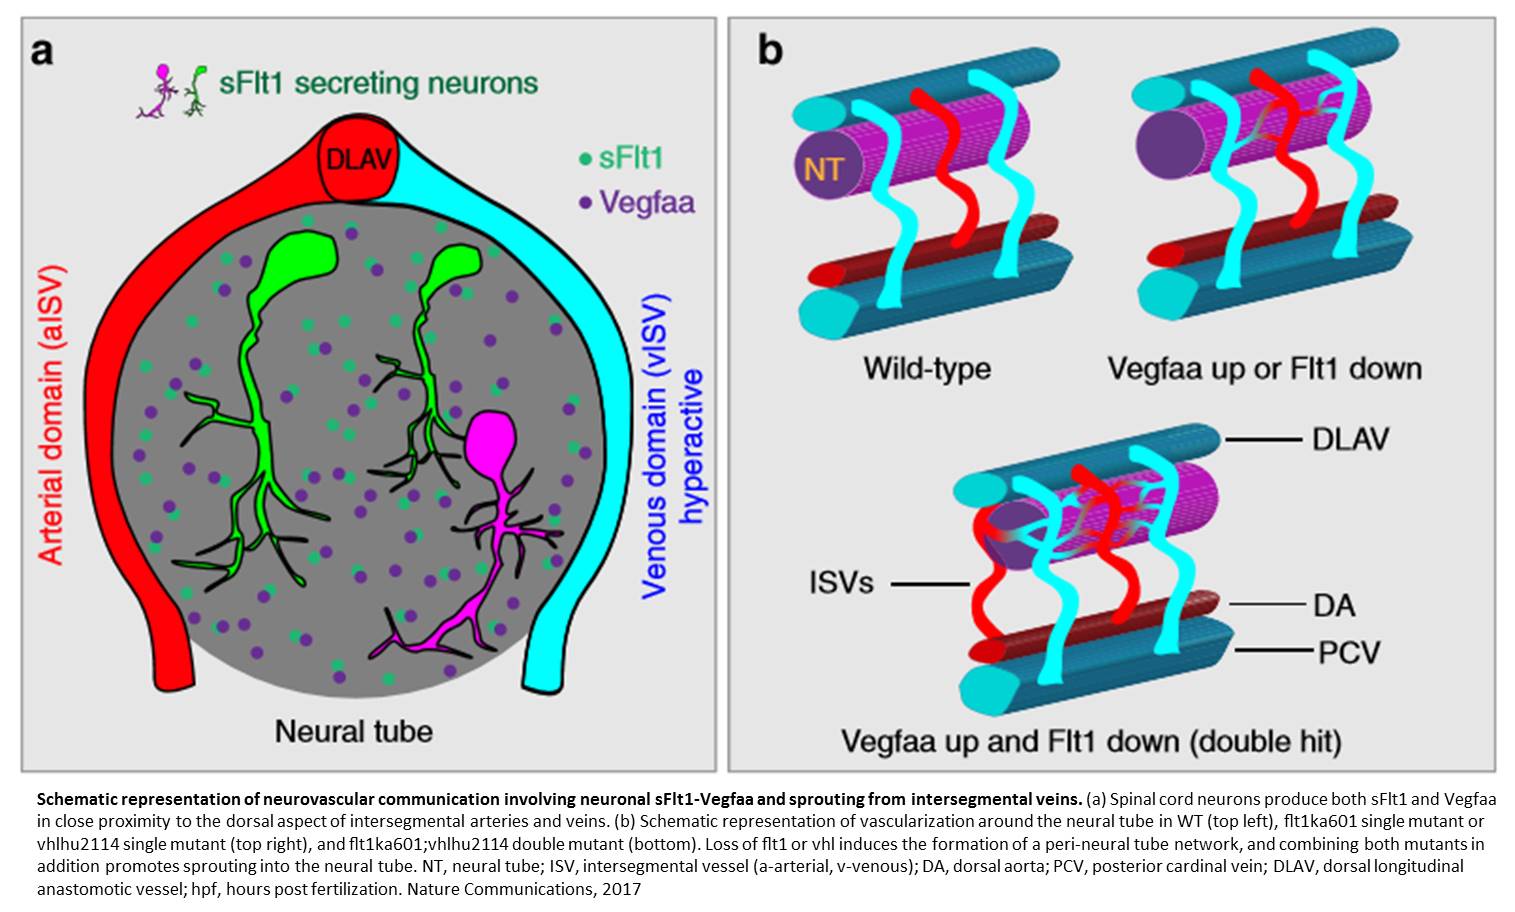 Neurons Modulate the Growth of Blood Vessels